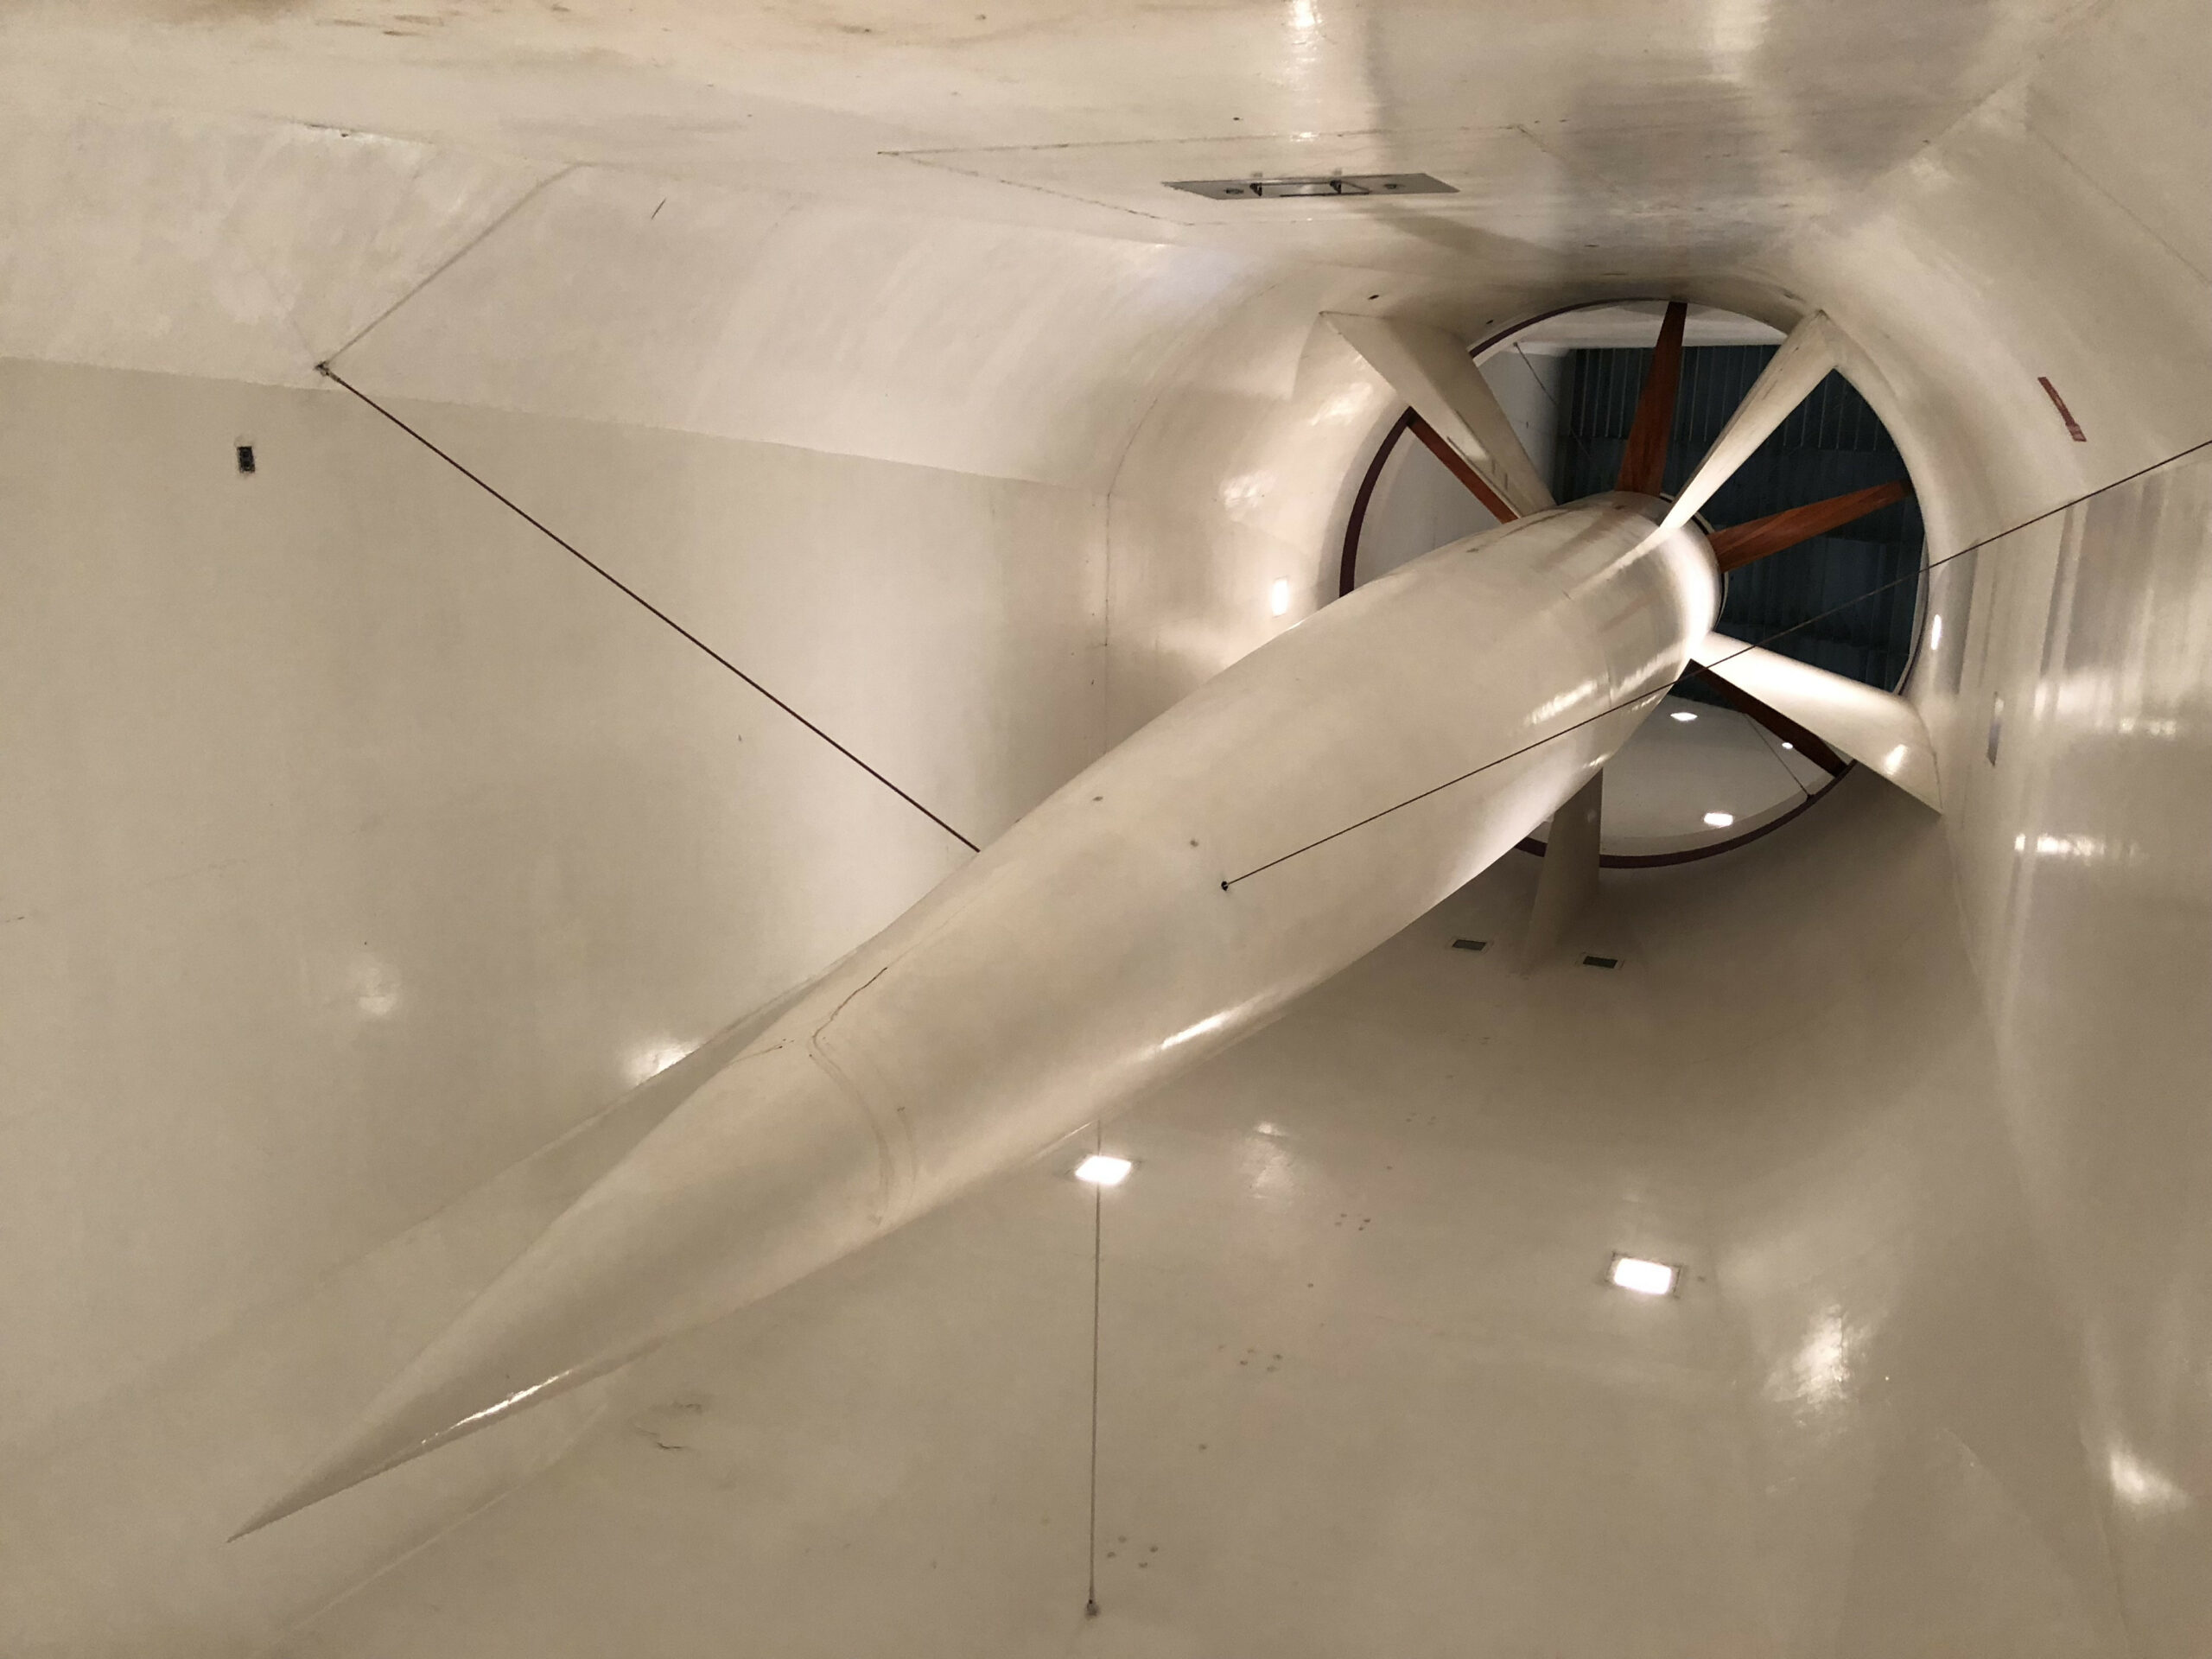 wing - Which type of fan is better for wind tunnel testing